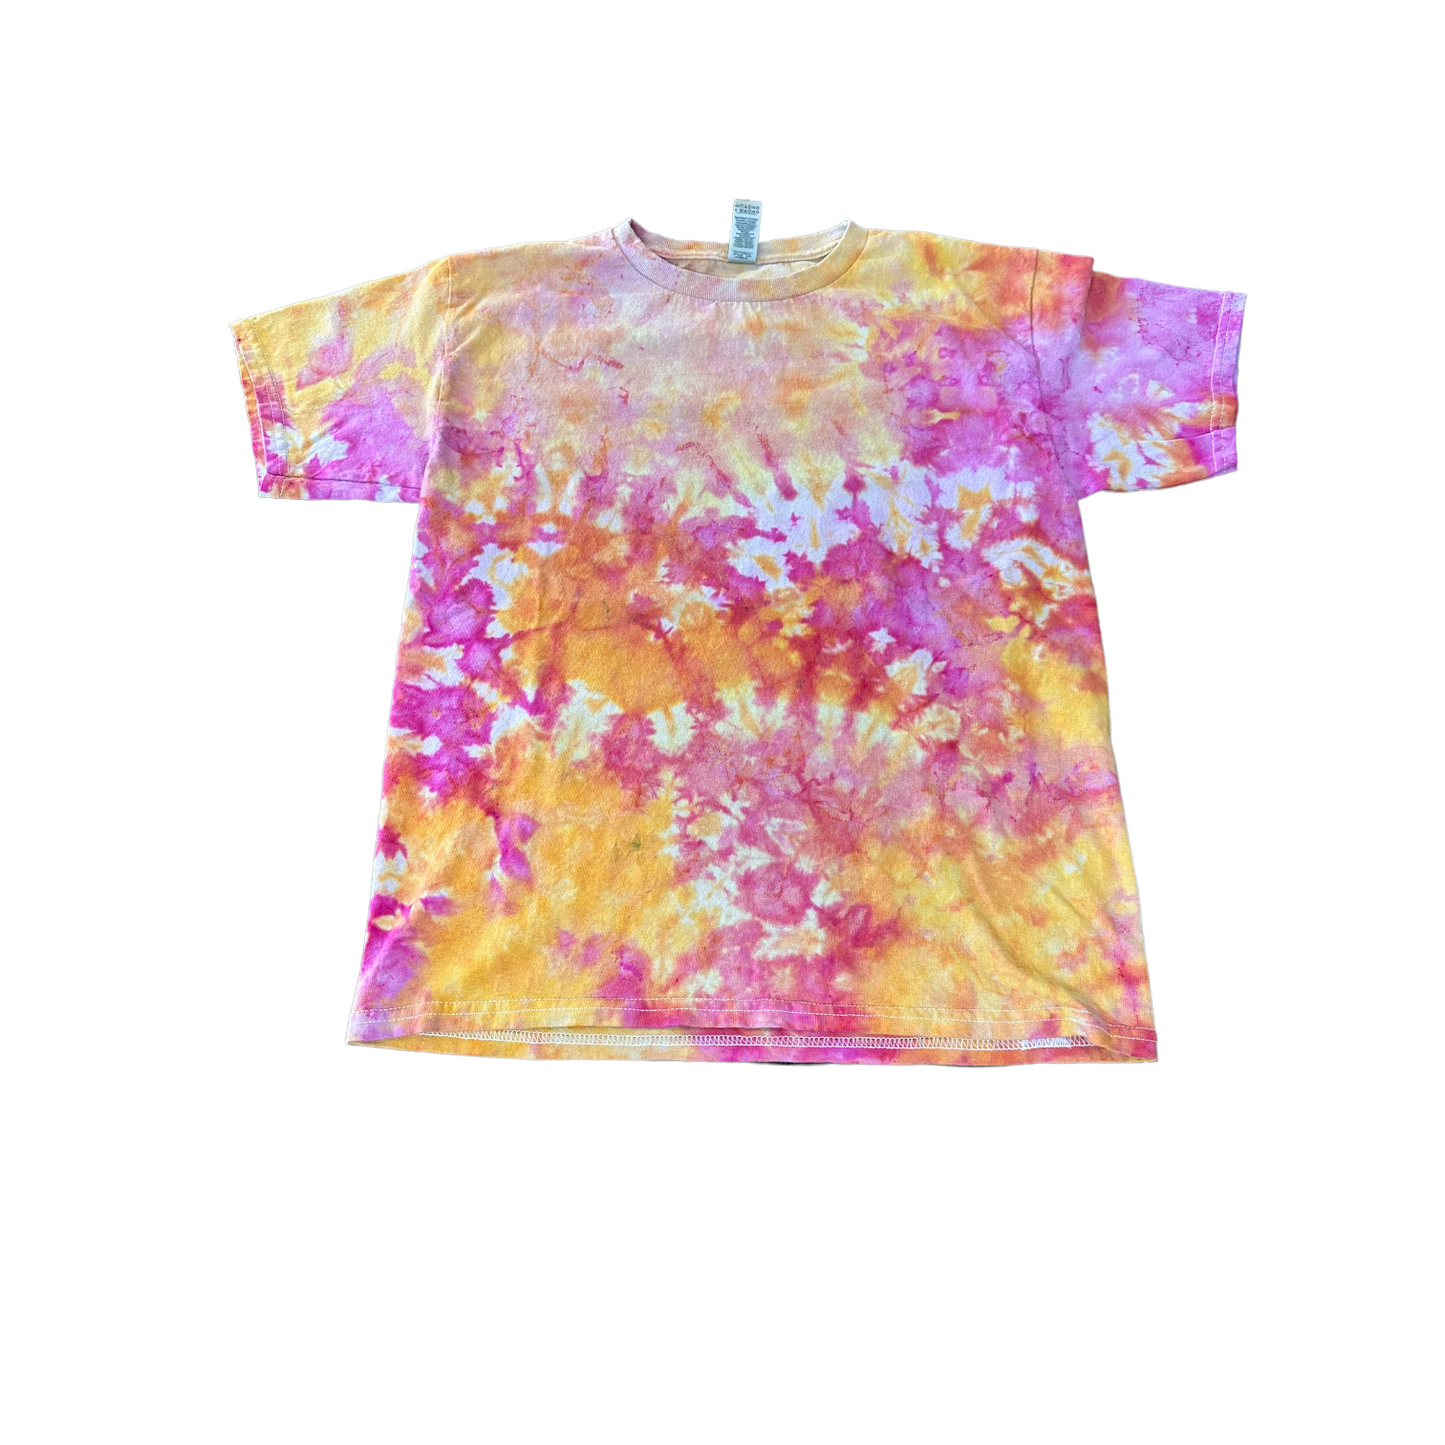 Youth Large Yellow Pink and Orange Scrunch Ice Dye Tie Dye